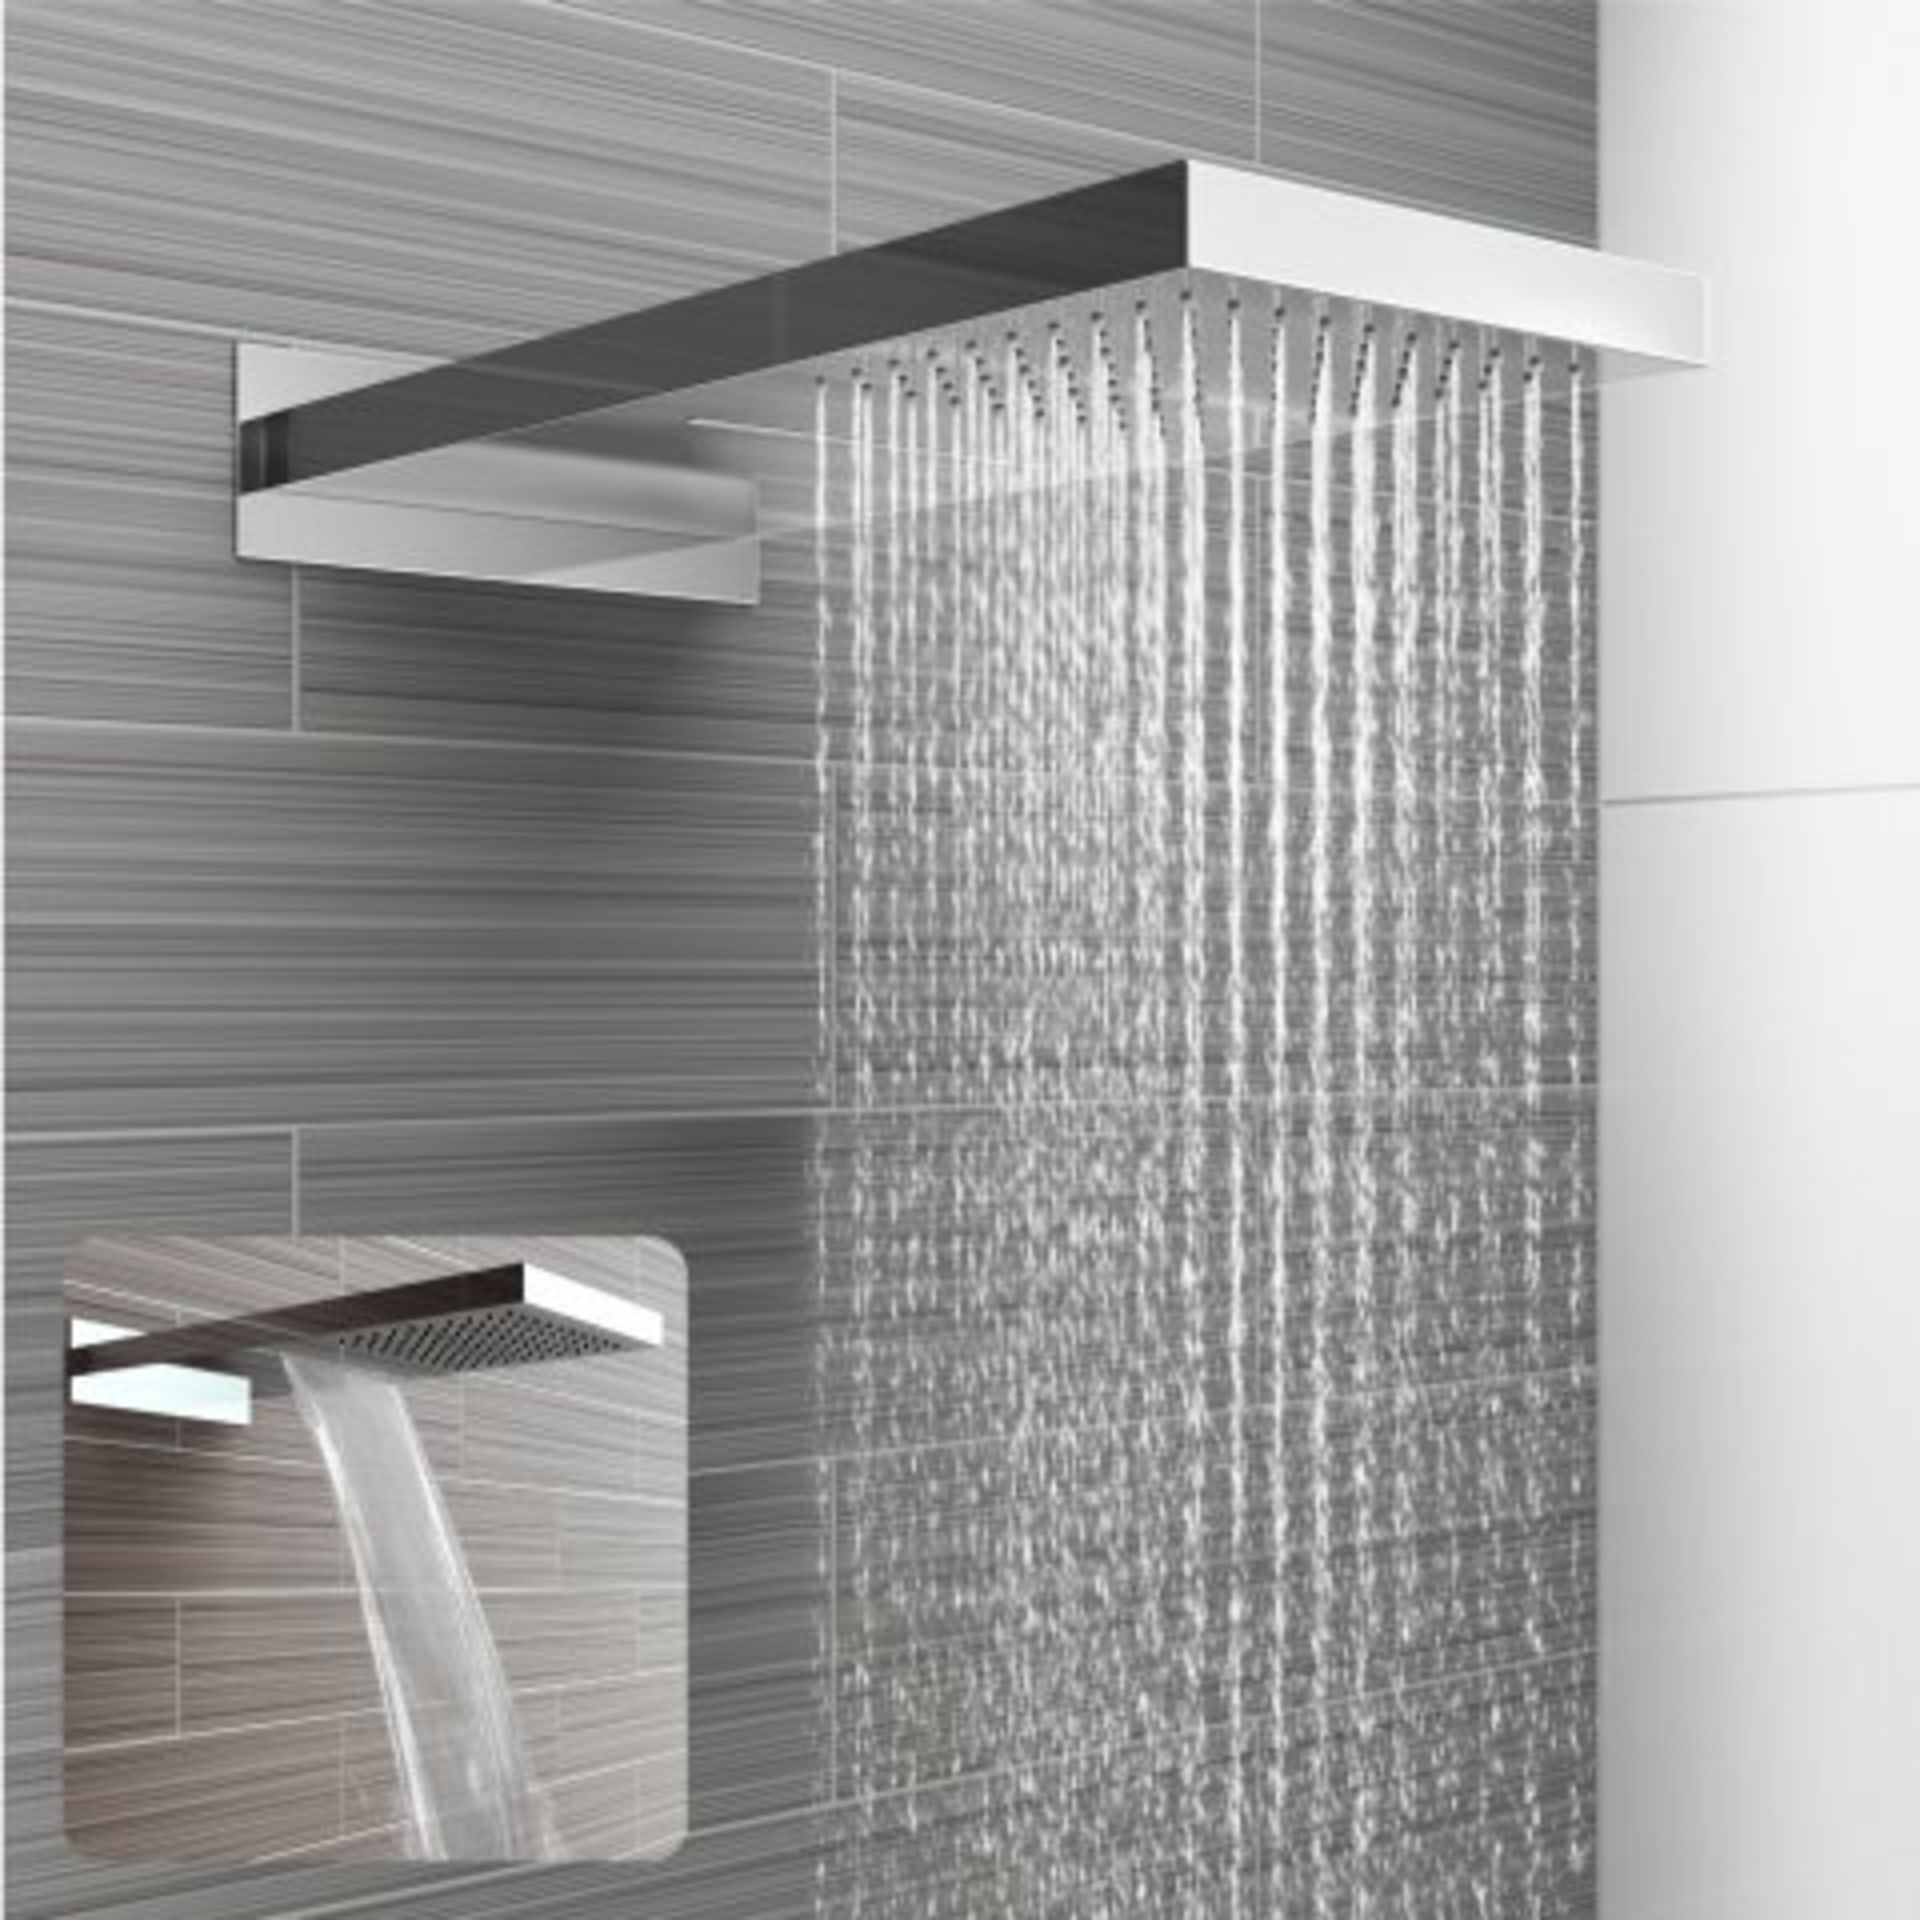 (H241) Stainless Steel 200x550mm Waterfall Shower Head RRP £449.99 "What An Experience": Enjoy